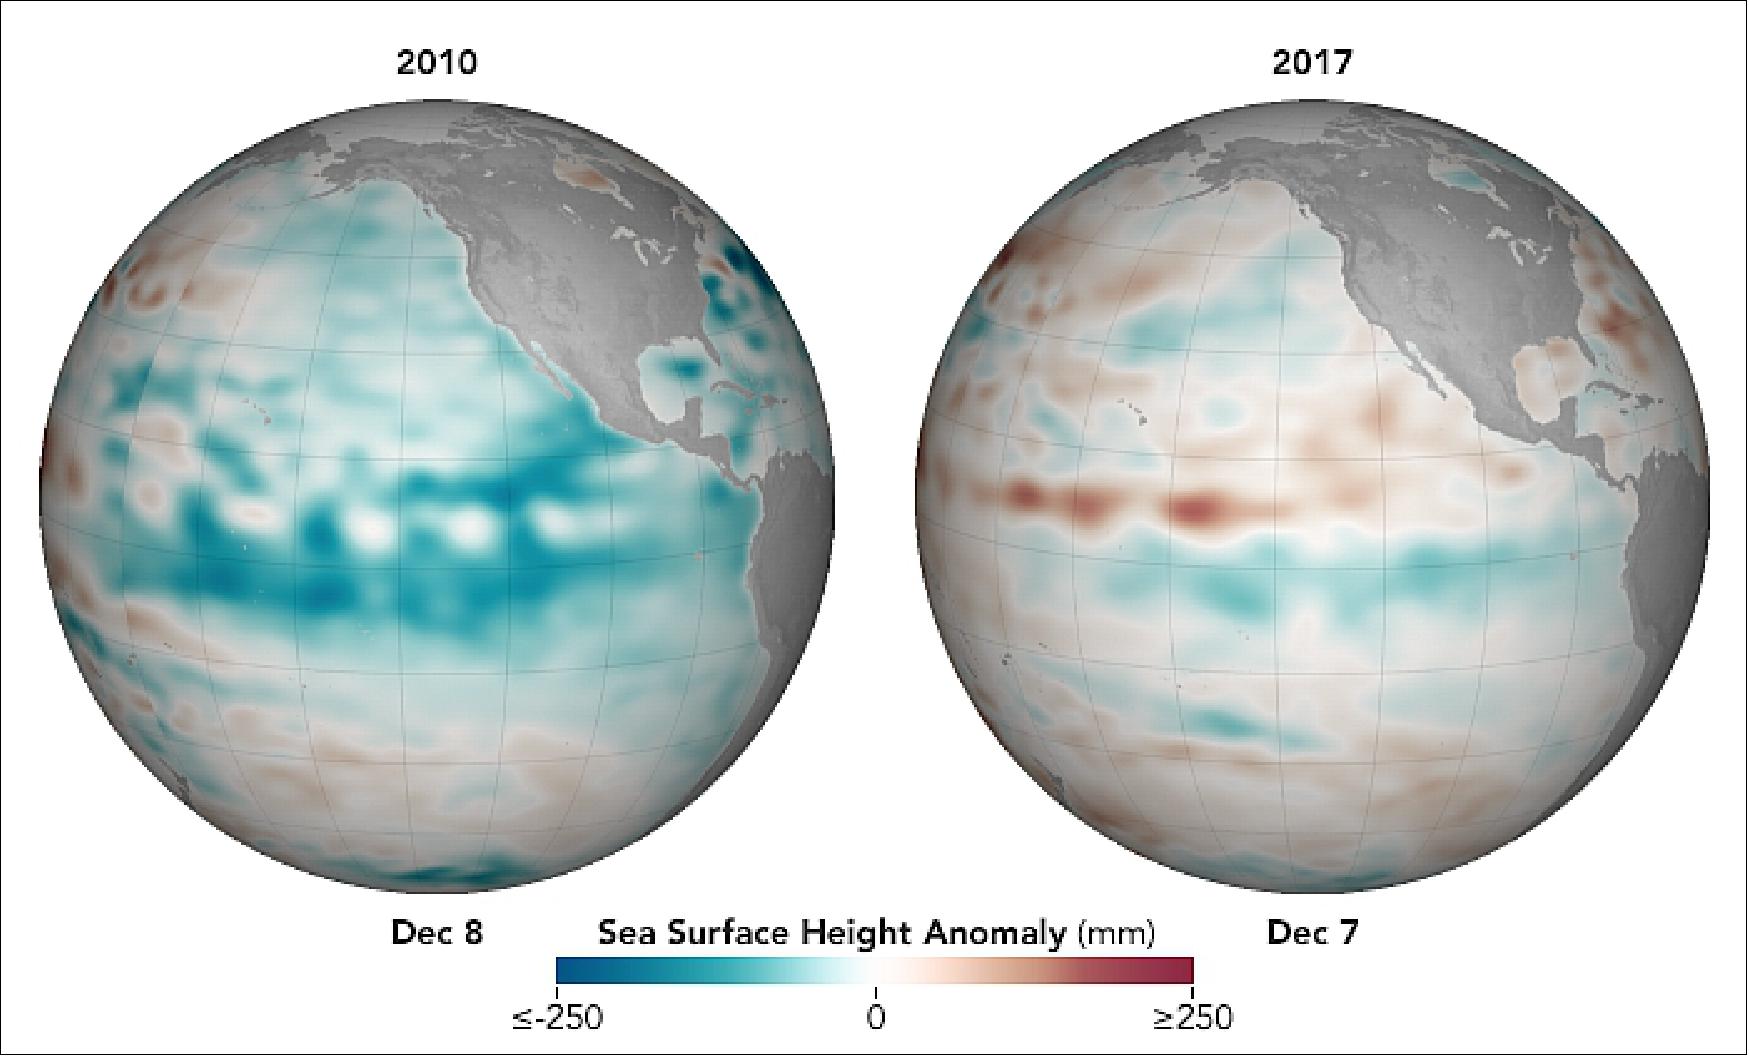 Figure 15: The Pacific sea surface height anomalies as analyzed by NASA scientists on Dec. 8, 2010 (left) and on Dec. 7, 2017 at right (image credit: NASA Earth Observatory, images by Joshua Stevens, using Jason-2 and Jason-3 data provided by Akiko Kayashi and Bill Patzert, NASA/JPL Ocean Surface Topography Team, story by Michael Carlowicz)